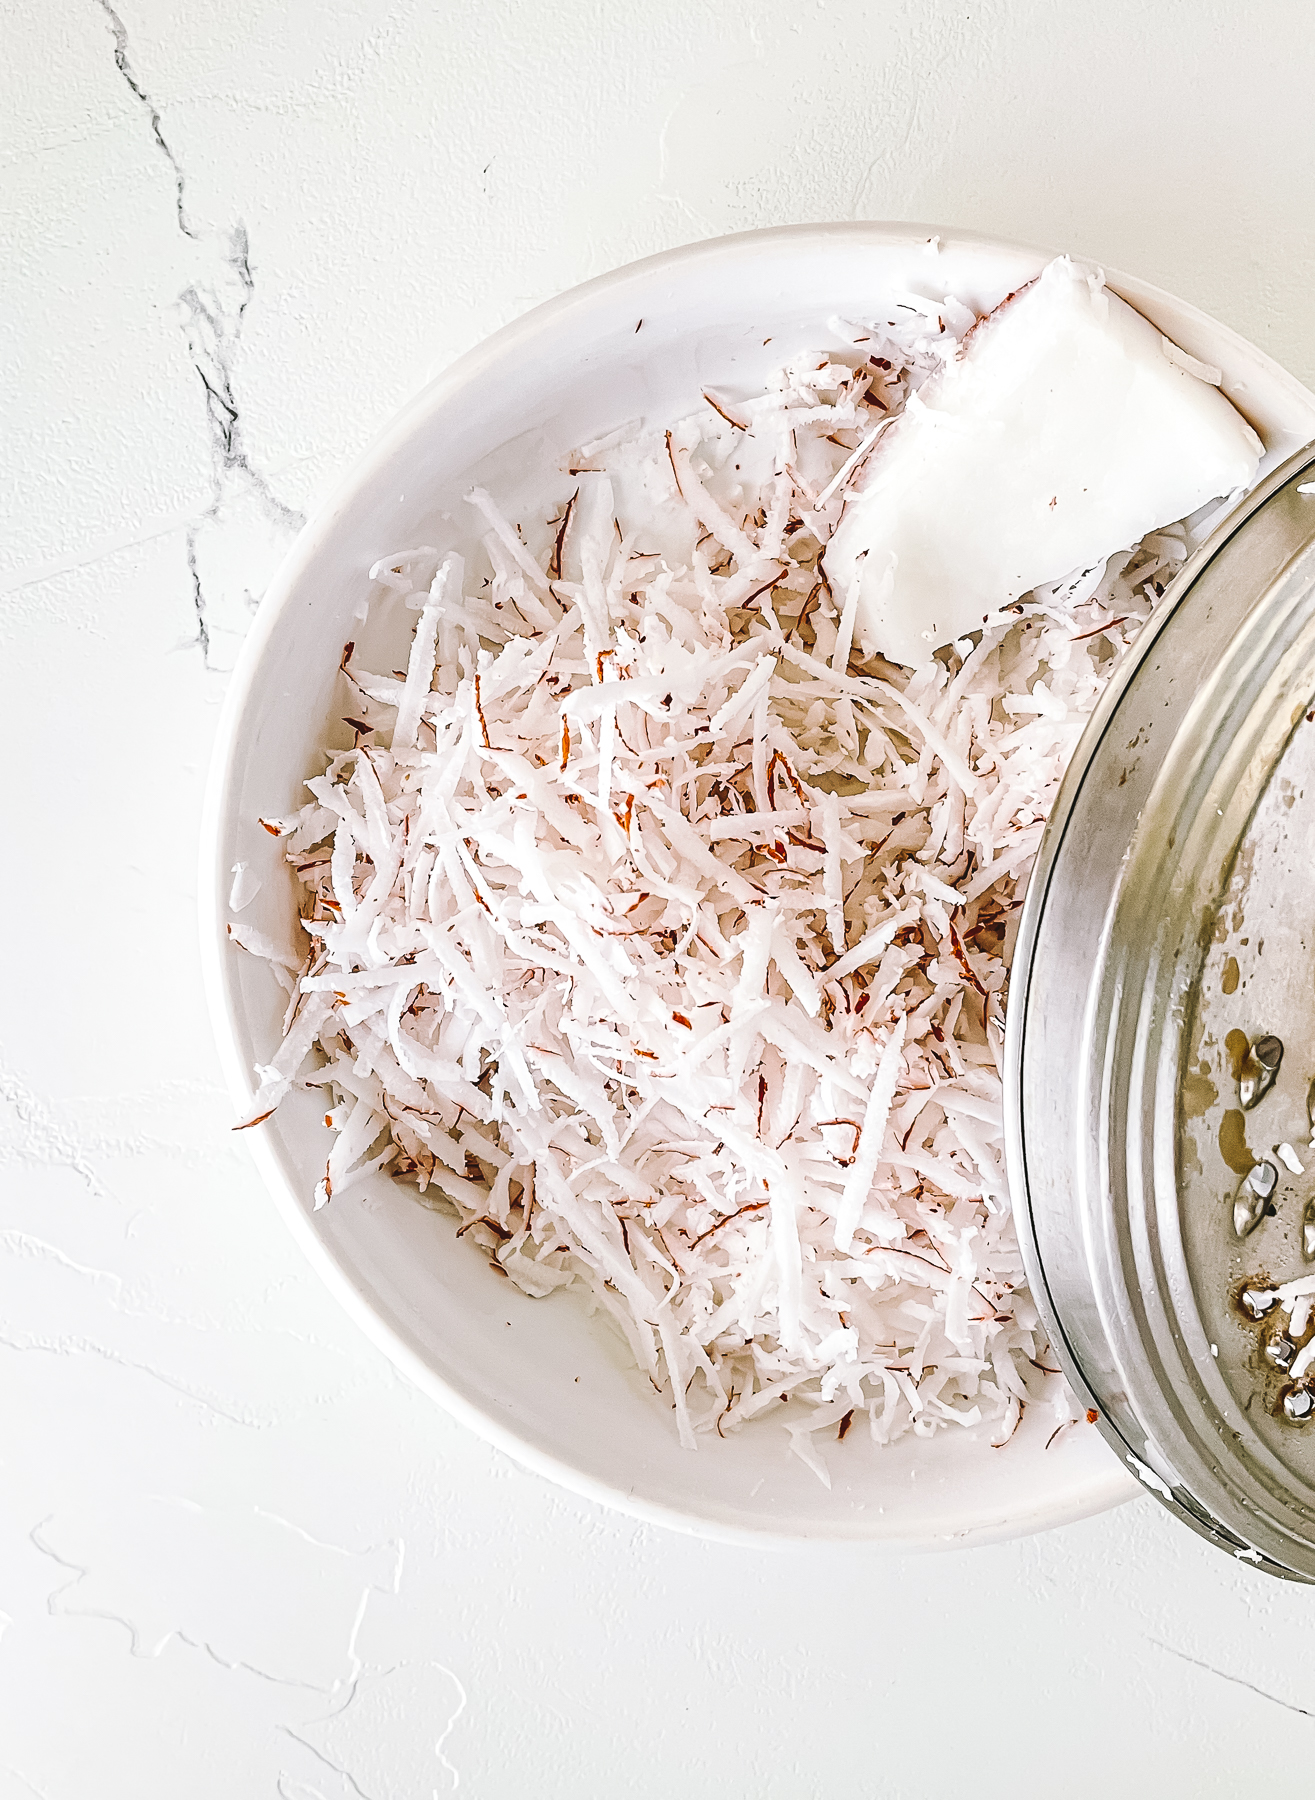 Shredded white coconut with bits of brown on the edges in a bowl with the grater beside it.